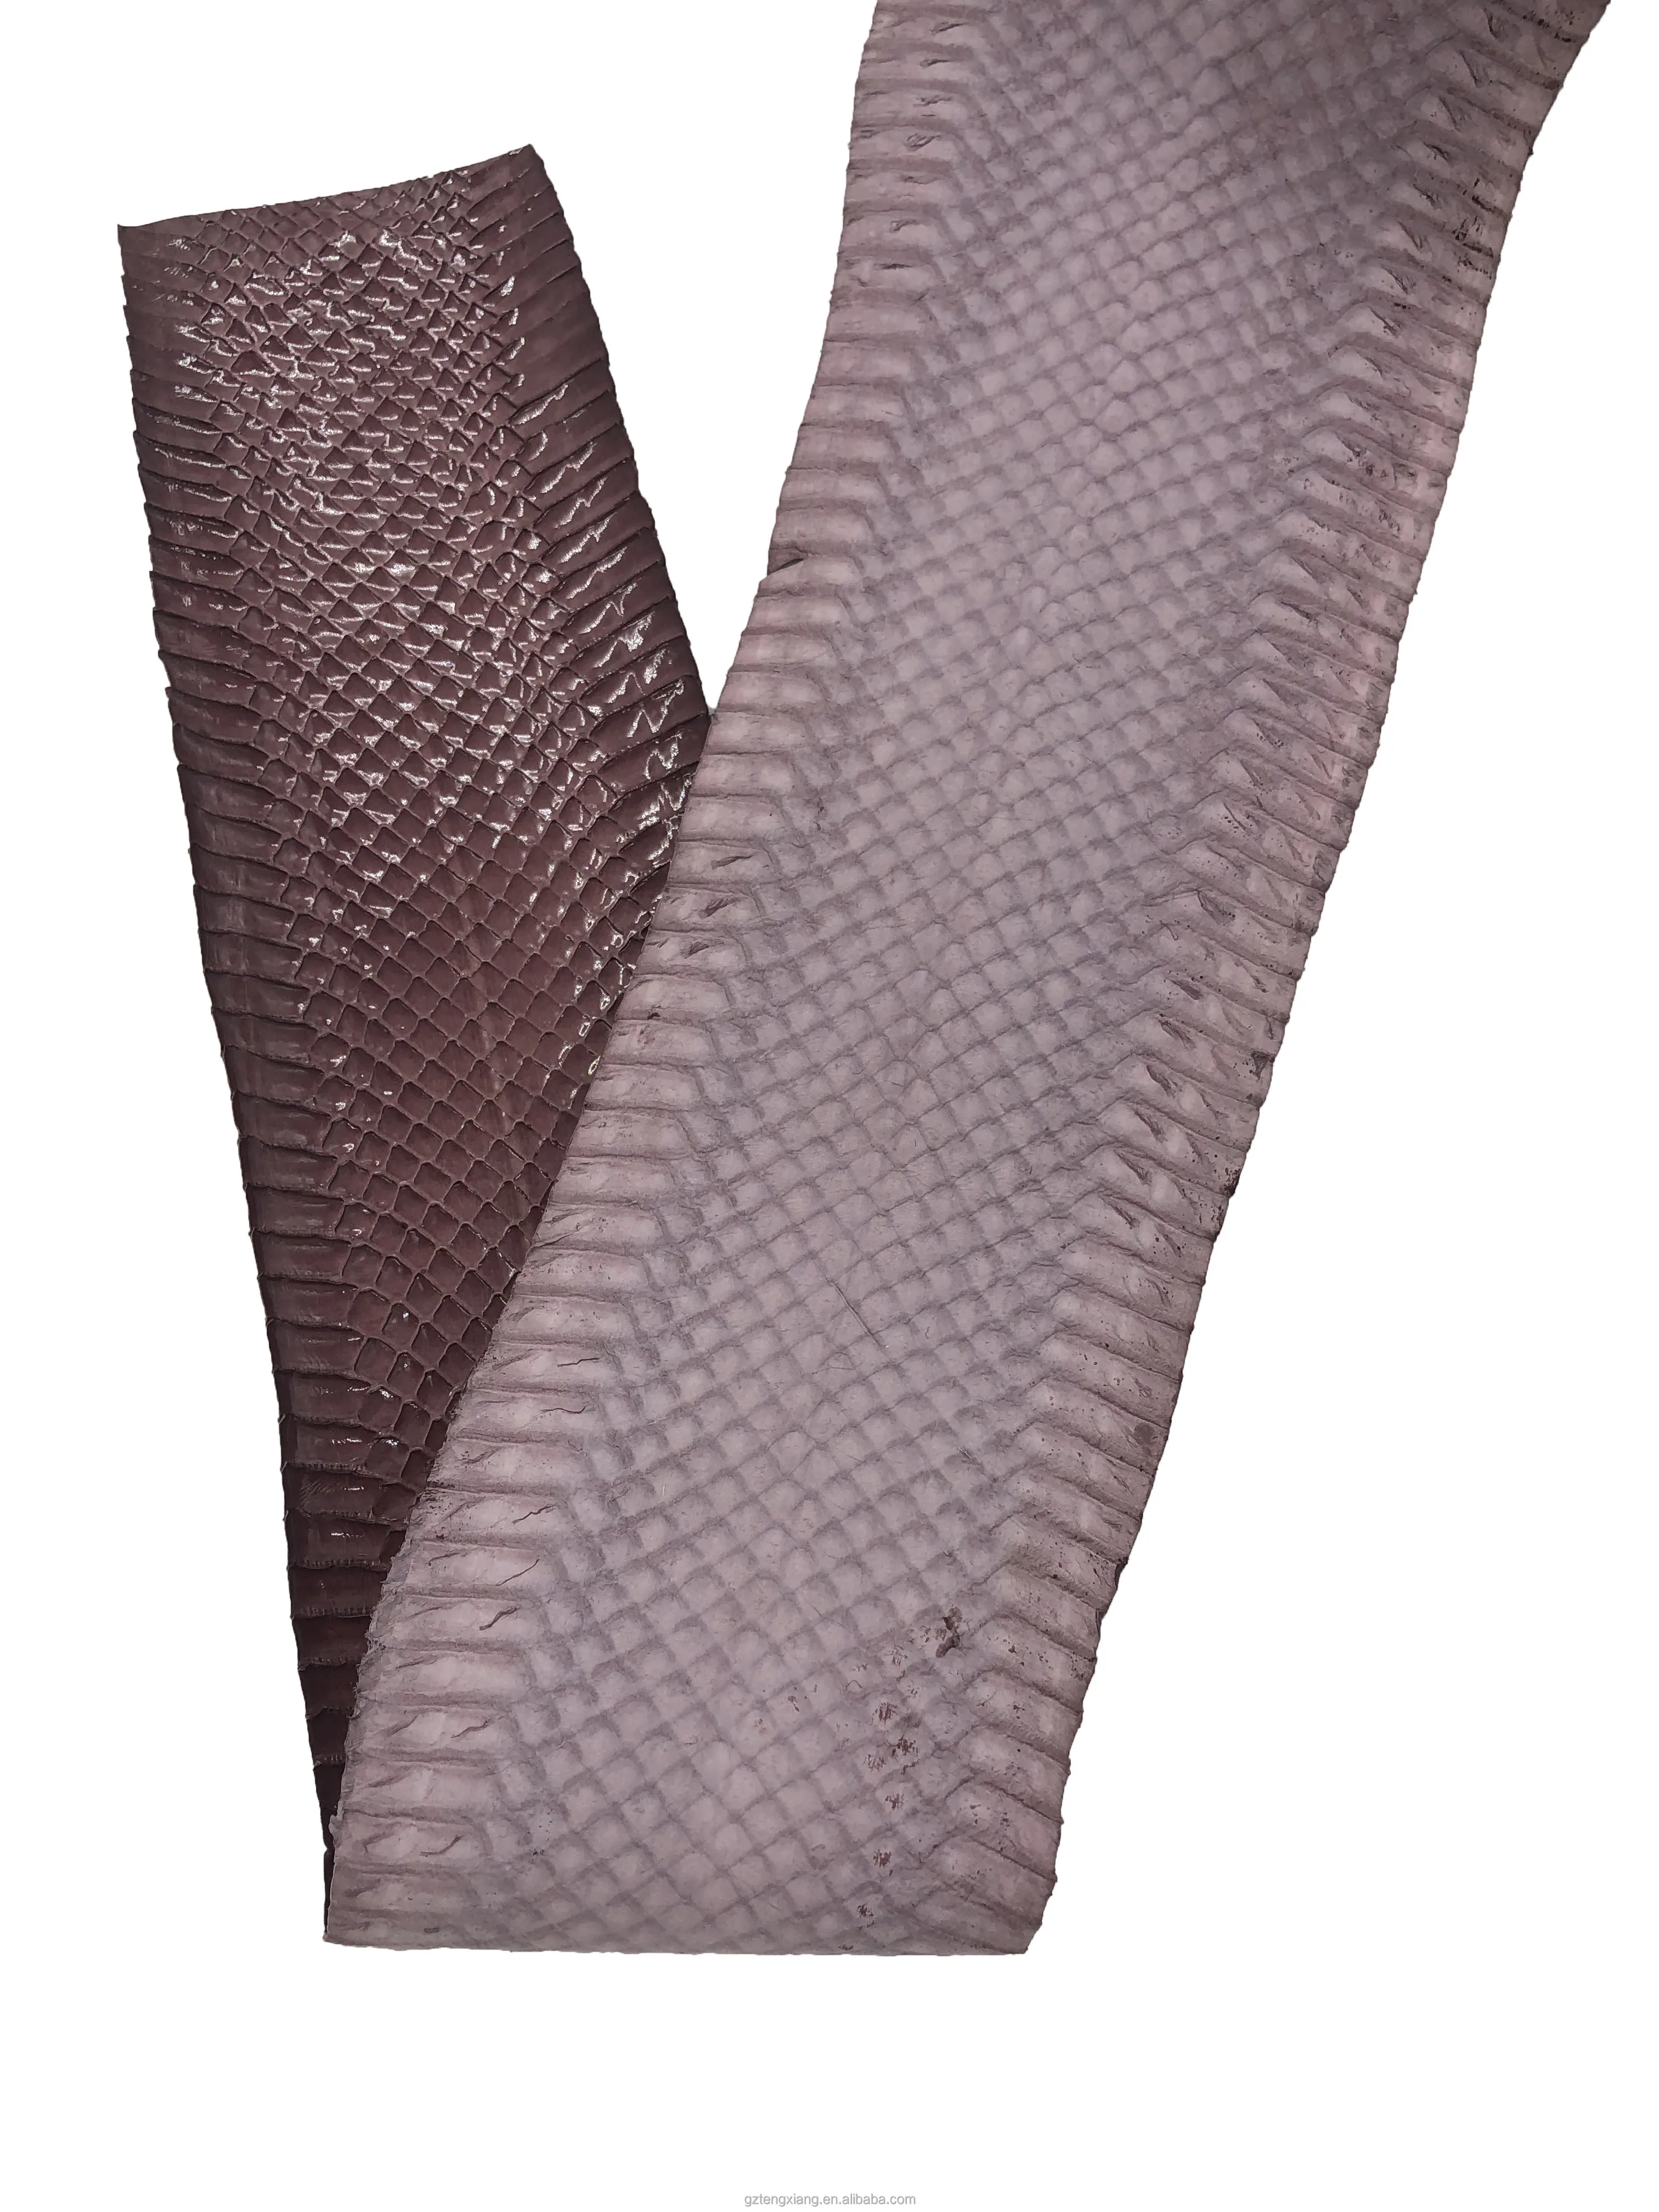 water snake  skin for the glaze shoes snake leather hide genuine leather material